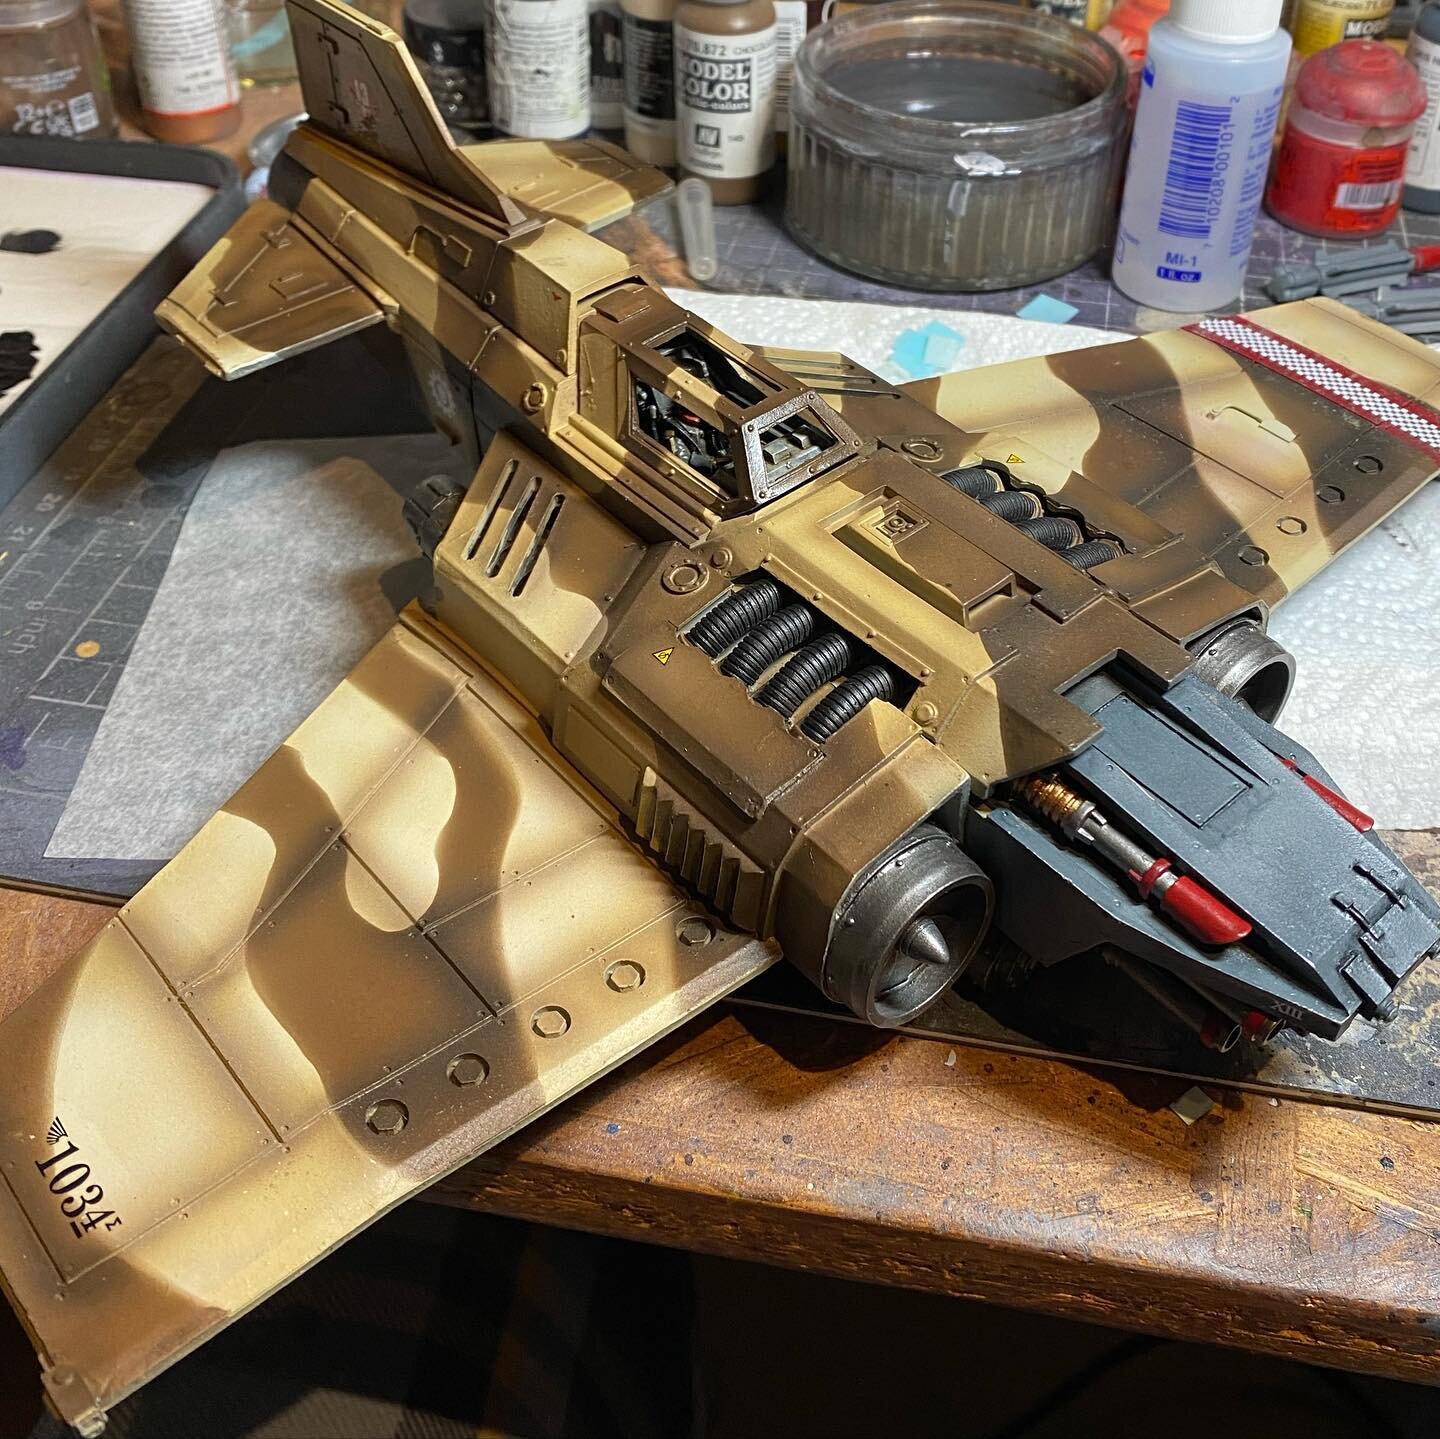 Getting there I think&hellip;.still some work on the grey nose, some gentle chipping, some weathering and oils to go, but we might be nearly there with the #thunderbolt

#thehobbybutterflies #hobbybutterflies #30k #horusheresy #hardforheresy #heresyi